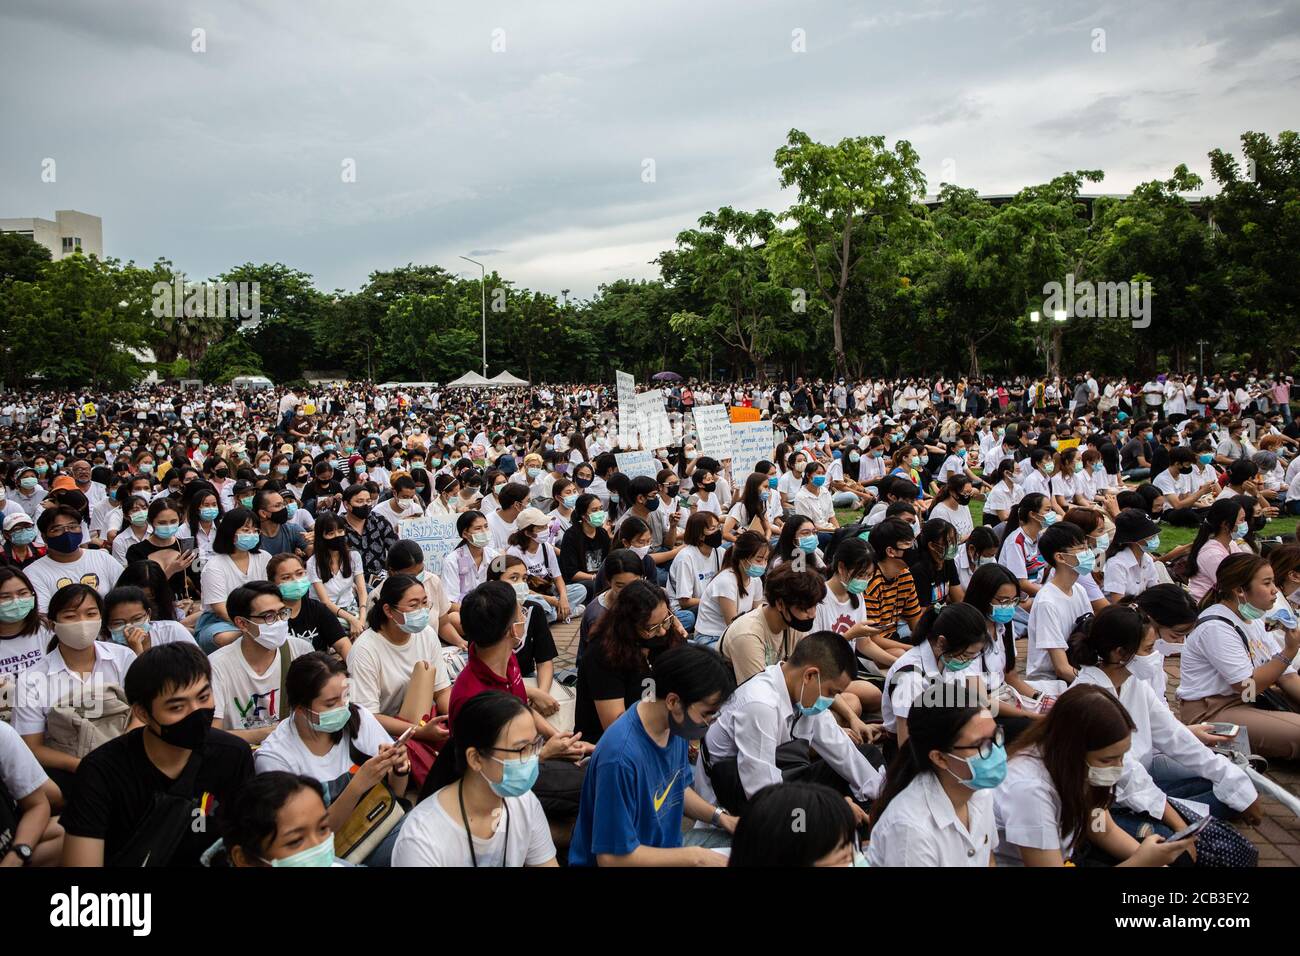 Bangkok, Thailand. 10th Aug, 2020. Approximately 3,000 anti-government protesters rally at Thammasat University in Bangkok, Thailand. This is the latest - and one of the largest - in a string of daily protests, beginning in late July, started by student organizations that have been calling for the dissolution of Thailand's military backed government led by Prime Minister Prayut Chan-O-Cha. Credit: Andre Malerba/ZUMA Wire/Alamy Live News Stock Photo